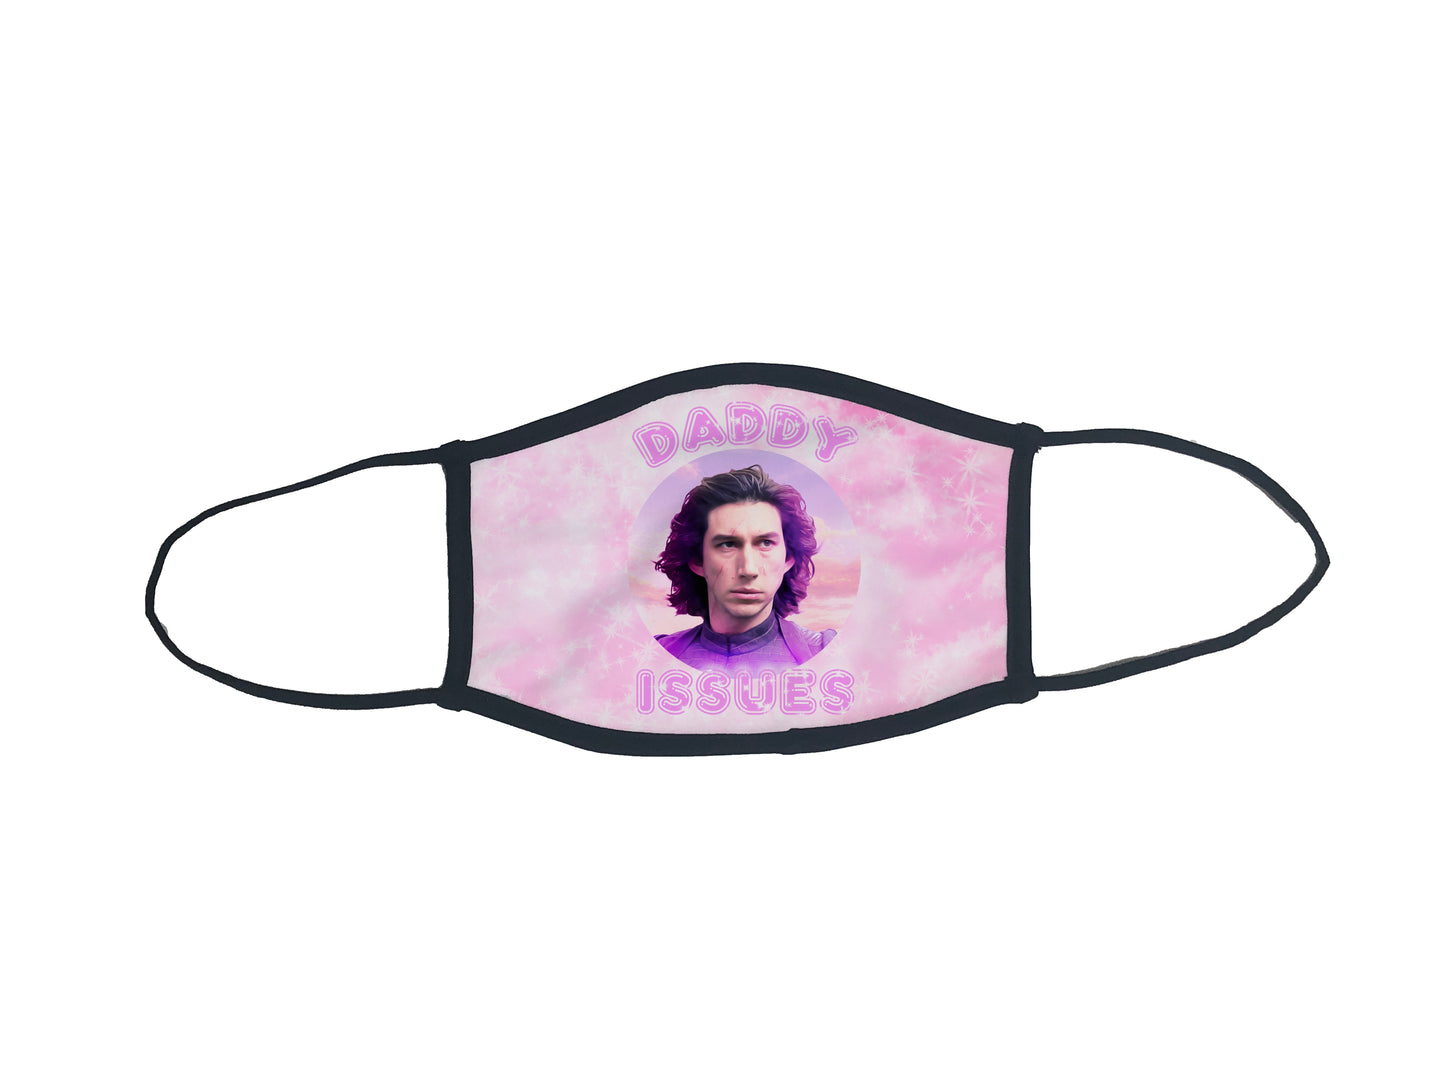 Adam Driver "Daddy Issues" Face Mask